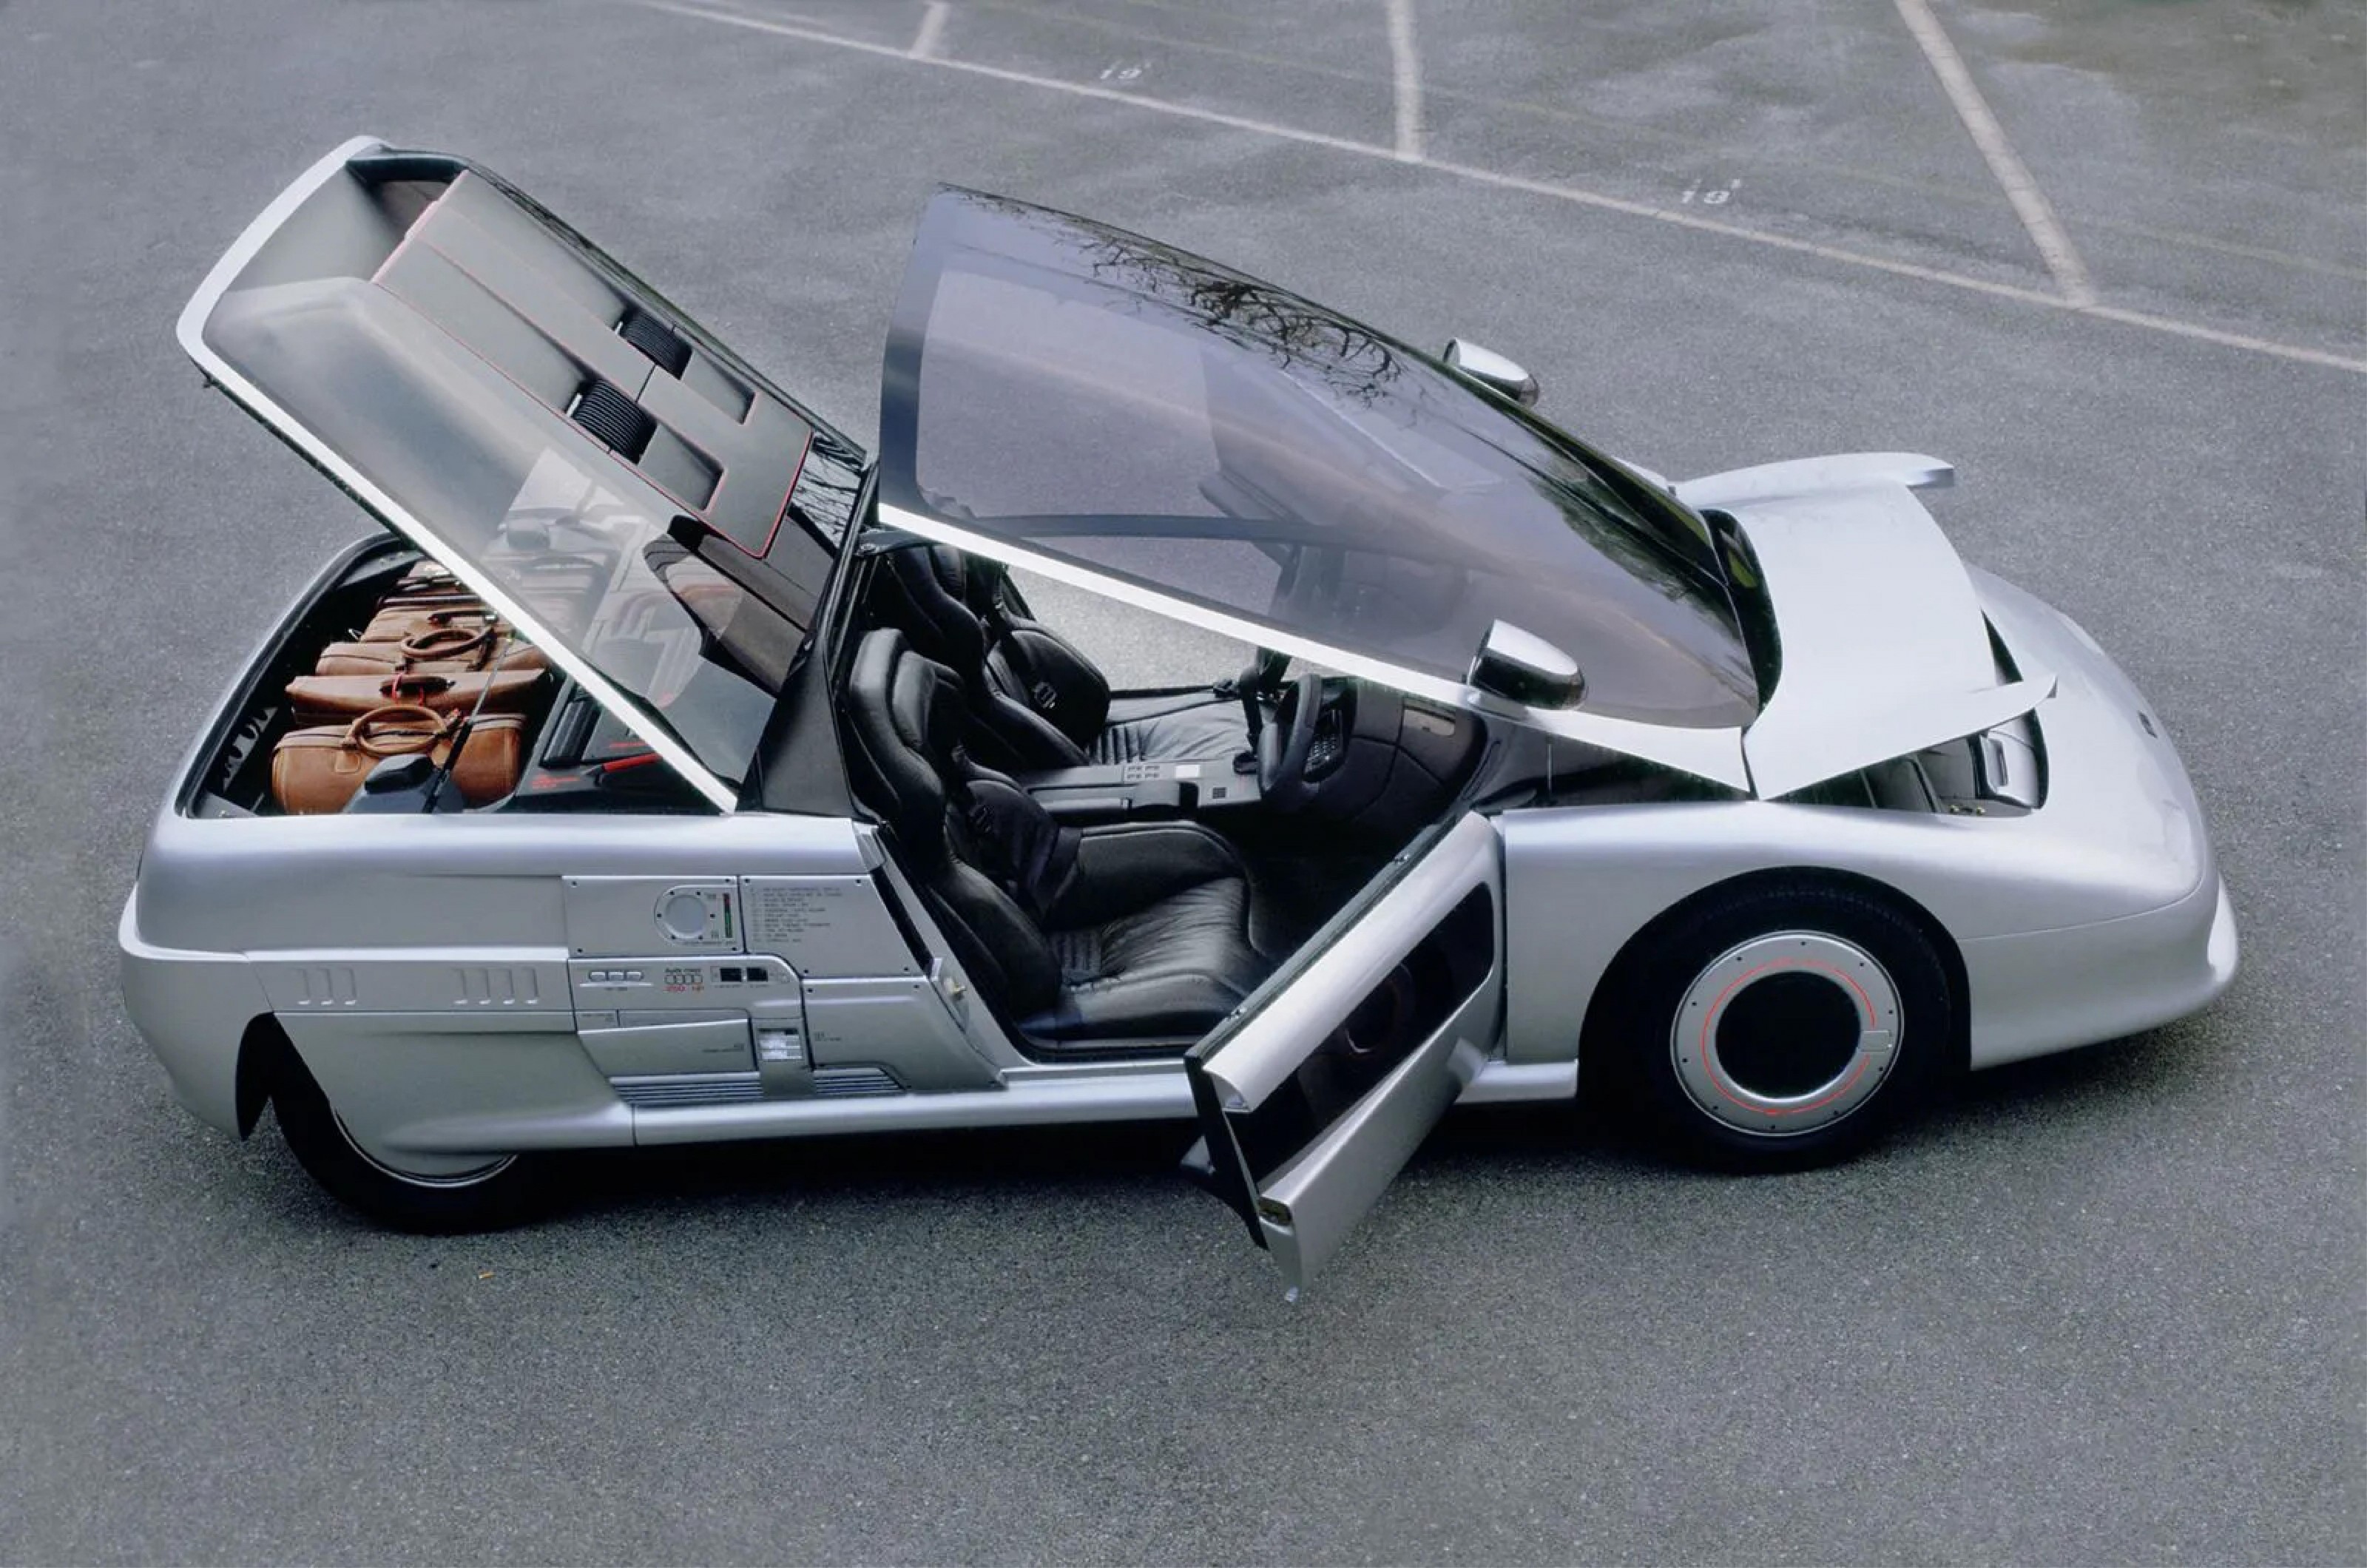 <p>Later we’ll see Lancia’s reimagining of the windshield, but the Italdesign Aspid takes it a step further to include the side windows and sunroof.</p>  <p>Although it’s one of the few cars on our list with conventional doors, these are entirely useless without the curved glass roof.</p>  <p>Italdesign says: “The starting point for the Aspid project was the possibility of molding windows with double curvature (made out of glass that was not cylindrical in cross-sections but spherical) on an industrial basis. The new technique meant that the designers could incorporate the glazed surfaces into the flowing overall lines of the car’s shape without having to introduce discontinuities.”</p>  <p>However, there is a central seam where the two passenger compartments are joined together.</p>